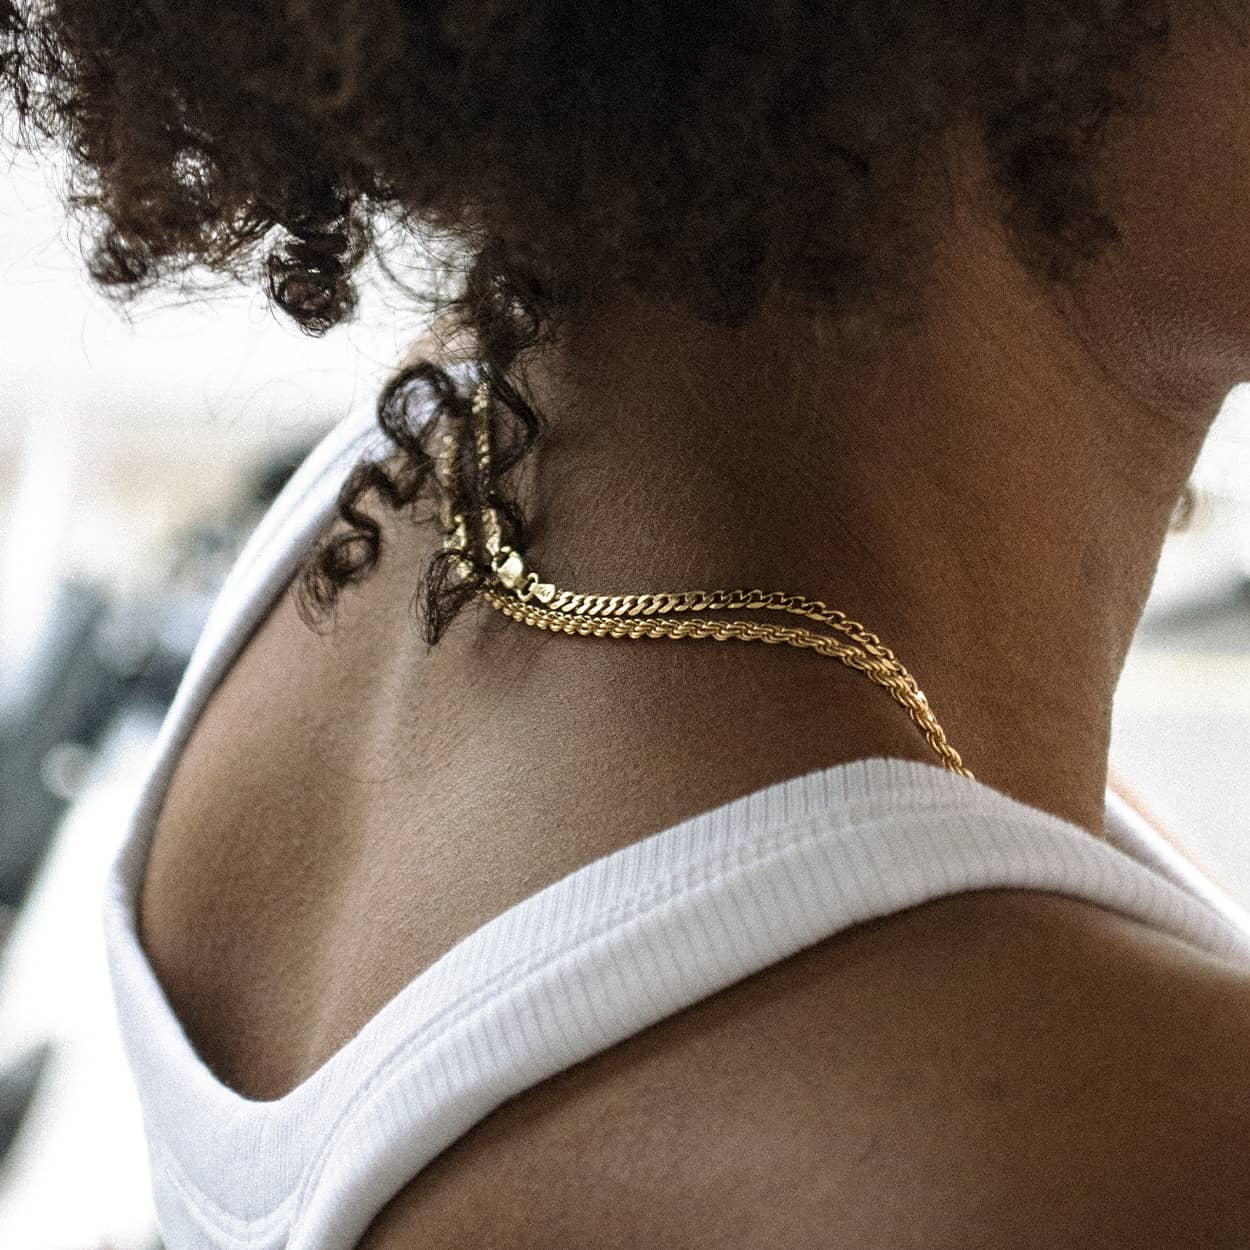 The Cuban Chain is an elegant and unisex piece of jewelry, crafted in Italy and made of 925 Sterling Silver with a high-quality 18 karat gold plating. Every jewelry is designed by Atelier Domingo's in France and is made to be worn by both men and women.